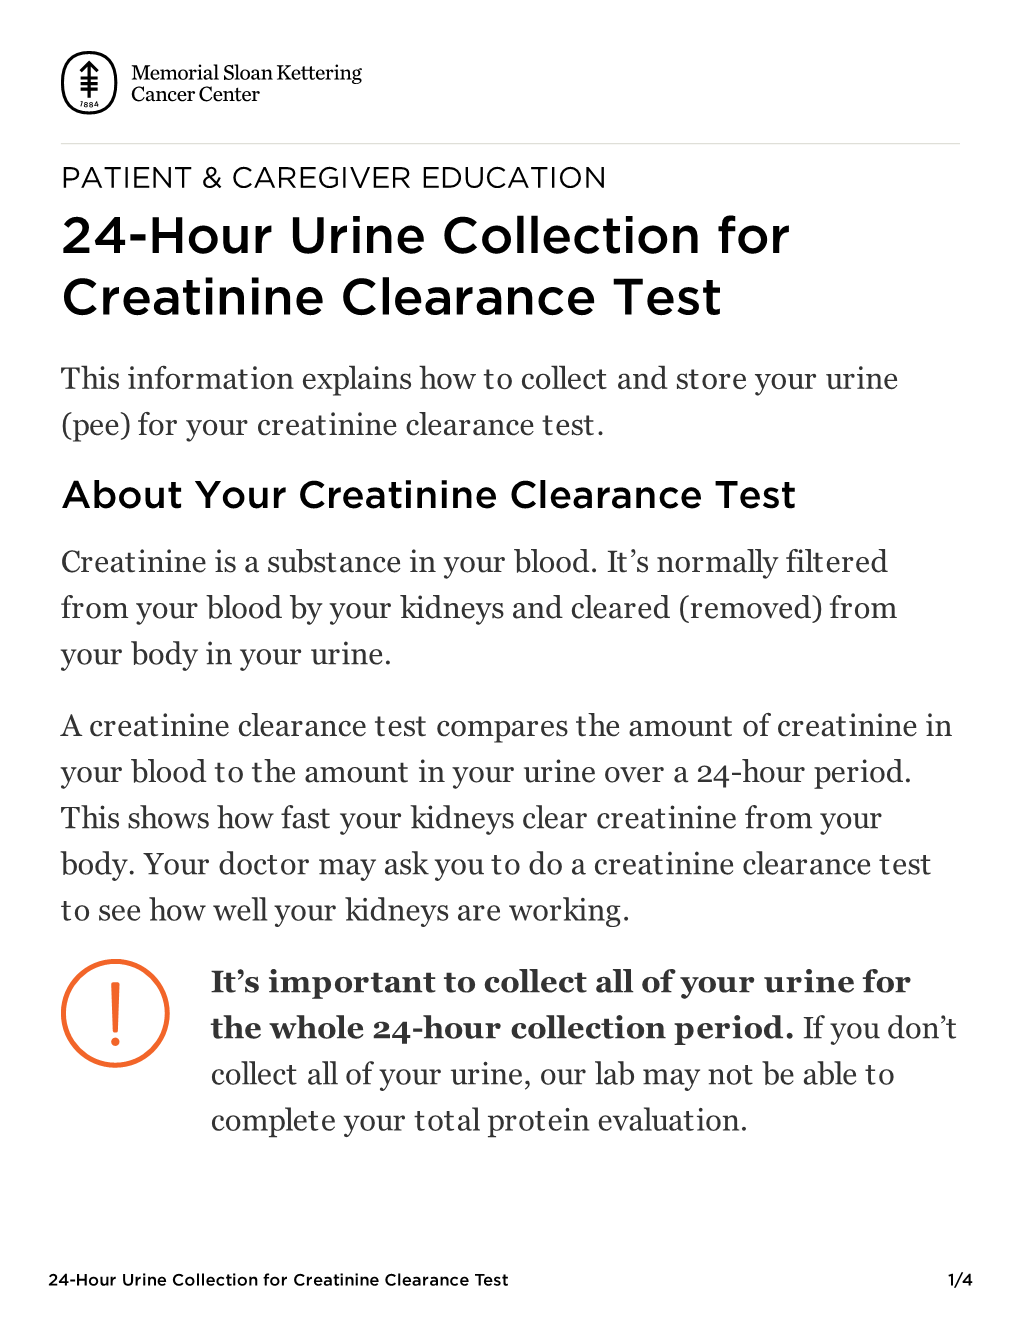 24-Hour Urine Collection for Creatinine Clearance Test